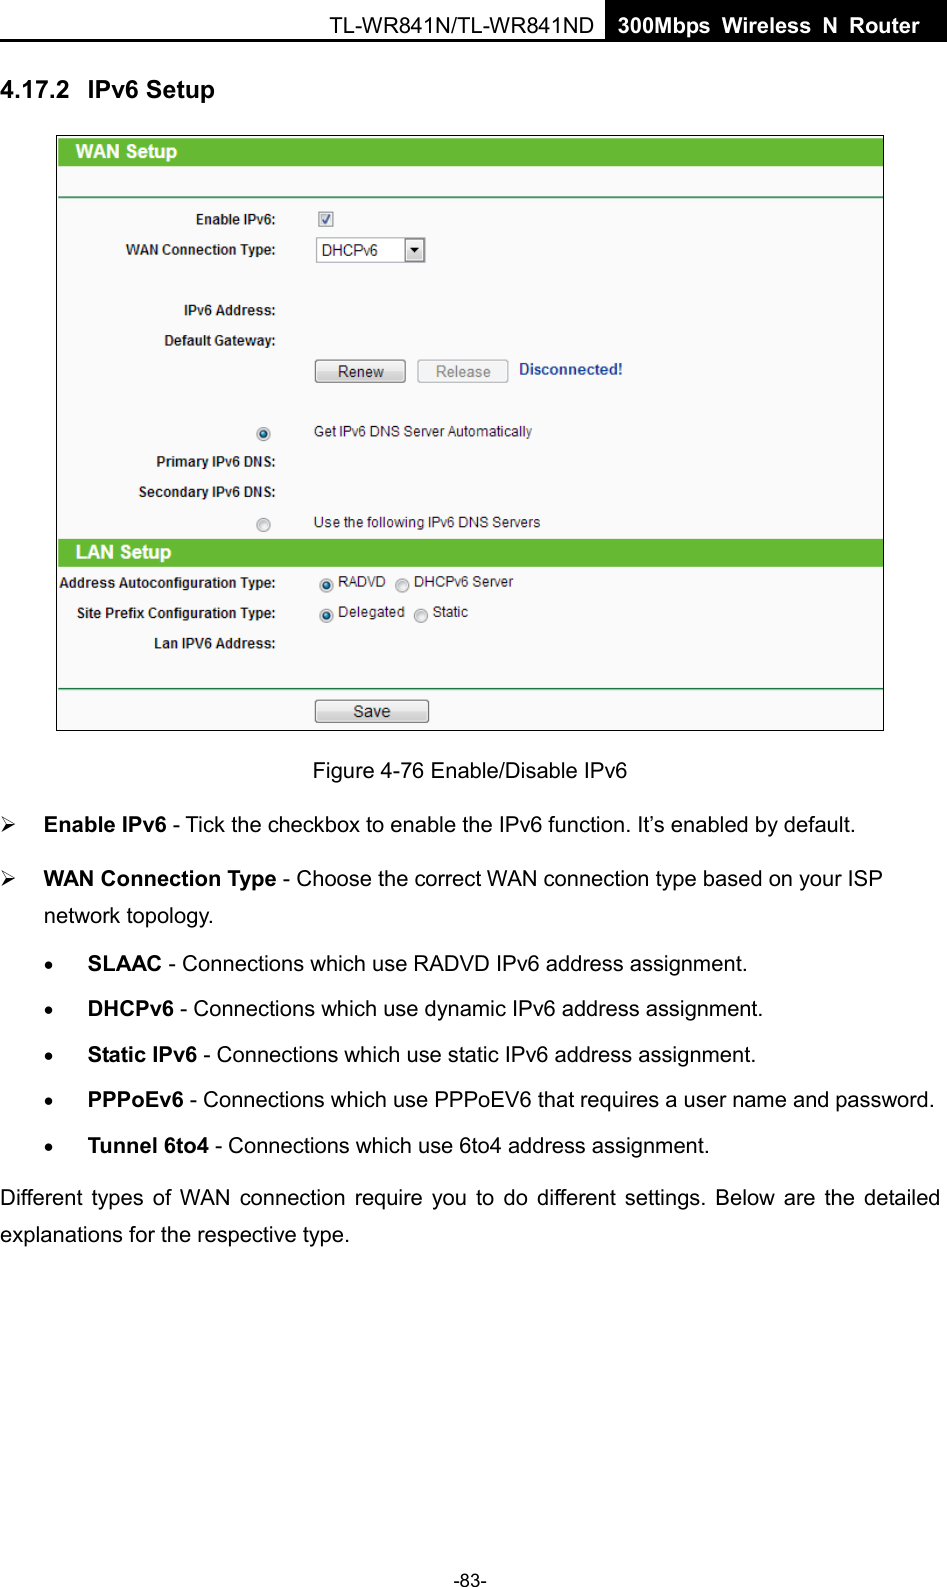  TL-WR841N/TL-WR841ND  300Mbps Wireless N Router    4.17.2 IPv6 Setup  Figure 4-76 Enable/Disable IPv6  Enable IPv6 - Tick the checkbox to enable the IPv6 function. It’s enabled by default.  WAN Connection Type - Choose the correct WAN connection type based on your ISP network topology. • SLAAC - Connections which use RADVD IPv6 address assignment. • DHCPv6 - Connections which use dynamic IPv6 address assignment.   • Static IPv6 - Connections which use static IPv6 address assignment.   • PPPoEv6 - Connections which use PPPoEV6 that requires a user name and password.   • Tunnel 6to4 - Connections which use 6to4 address assignment. Different types of WAN connection require you to do different settings. Below are the detailed explanations for the respective type. -83- 